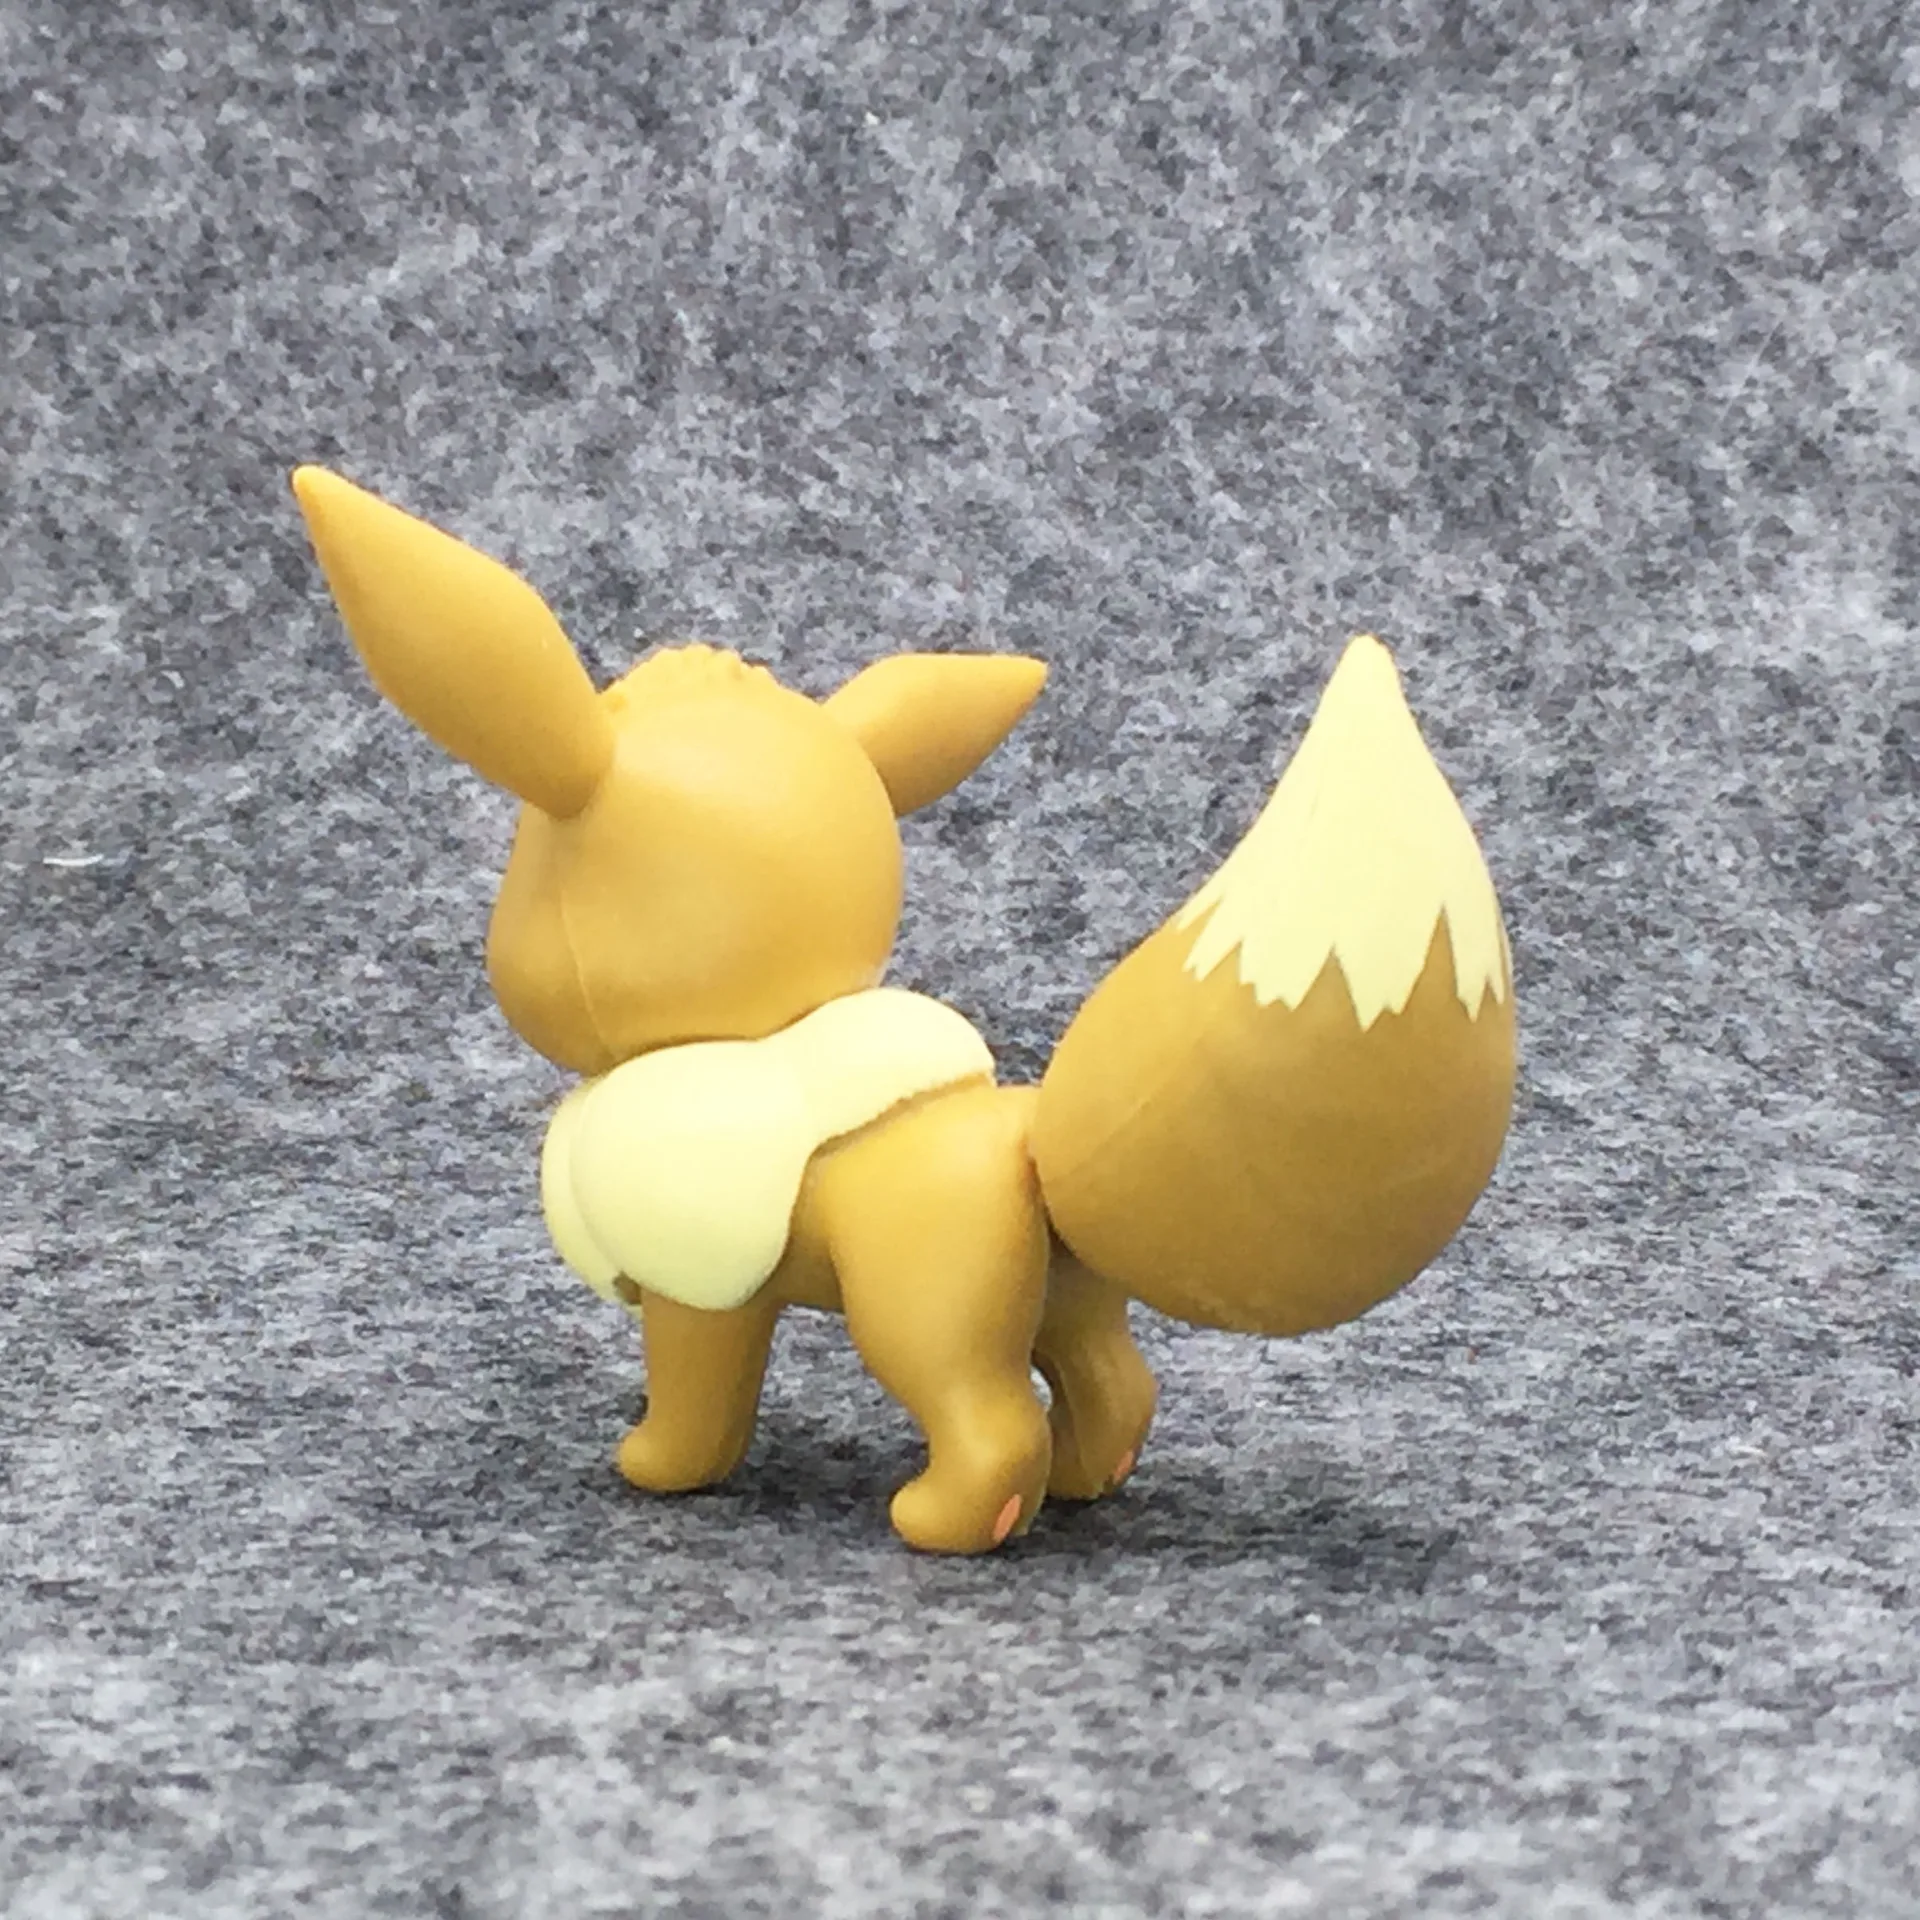 Takara Tomy Pokemon Detective pikachu Psyduck Mewtwo Bulbasaur Squirtle Eevee anime action& toy figures model